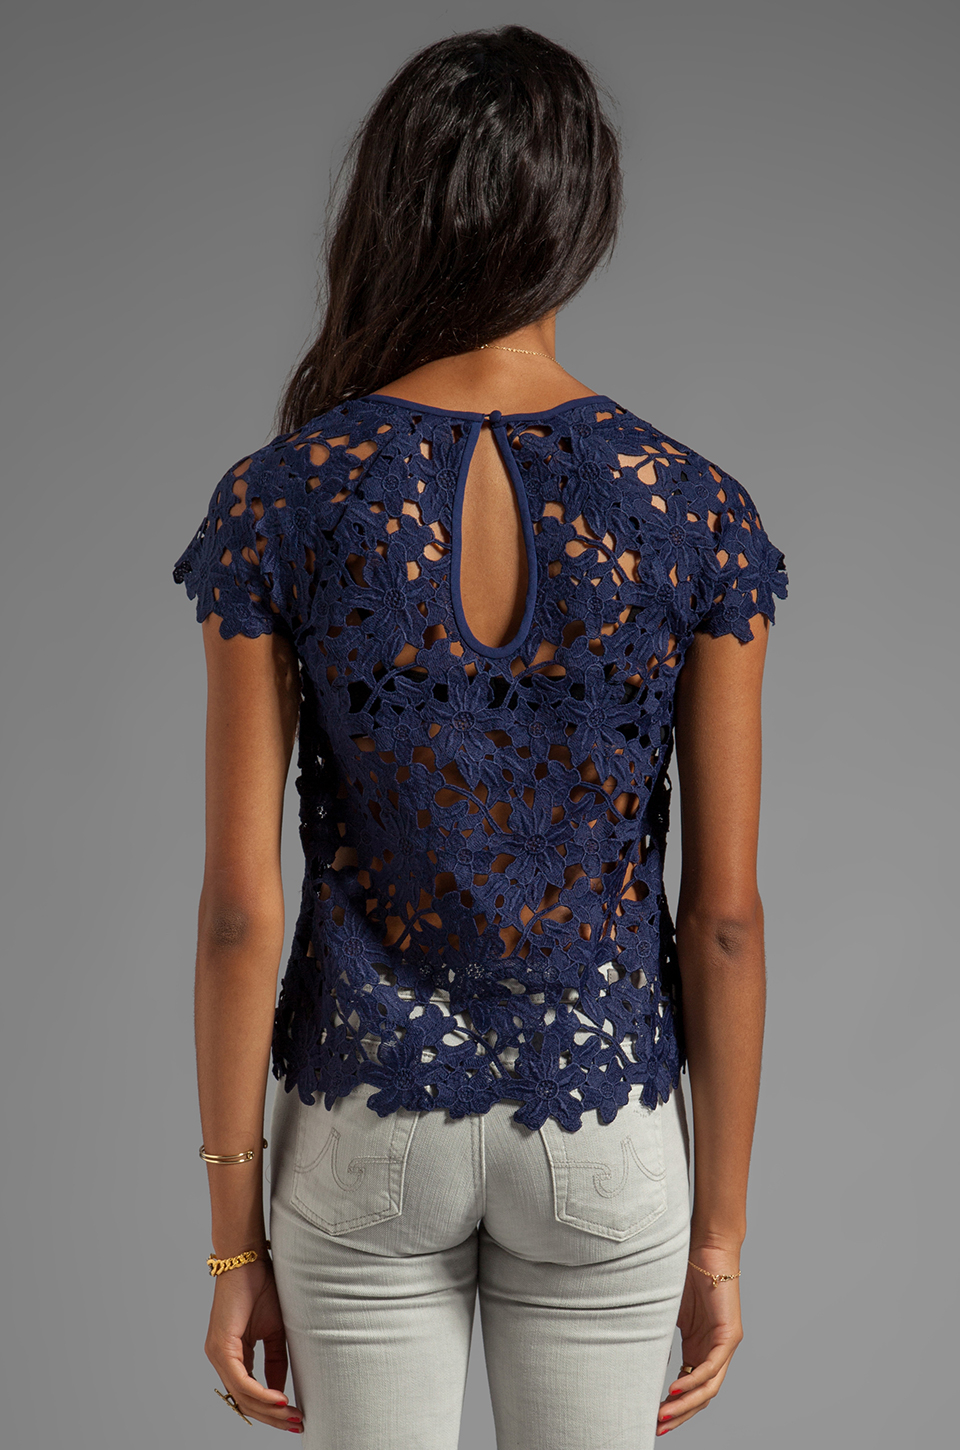 Lyst - Dolce Vita Quinch Floral Heavy Lace Top in Navy in Blue